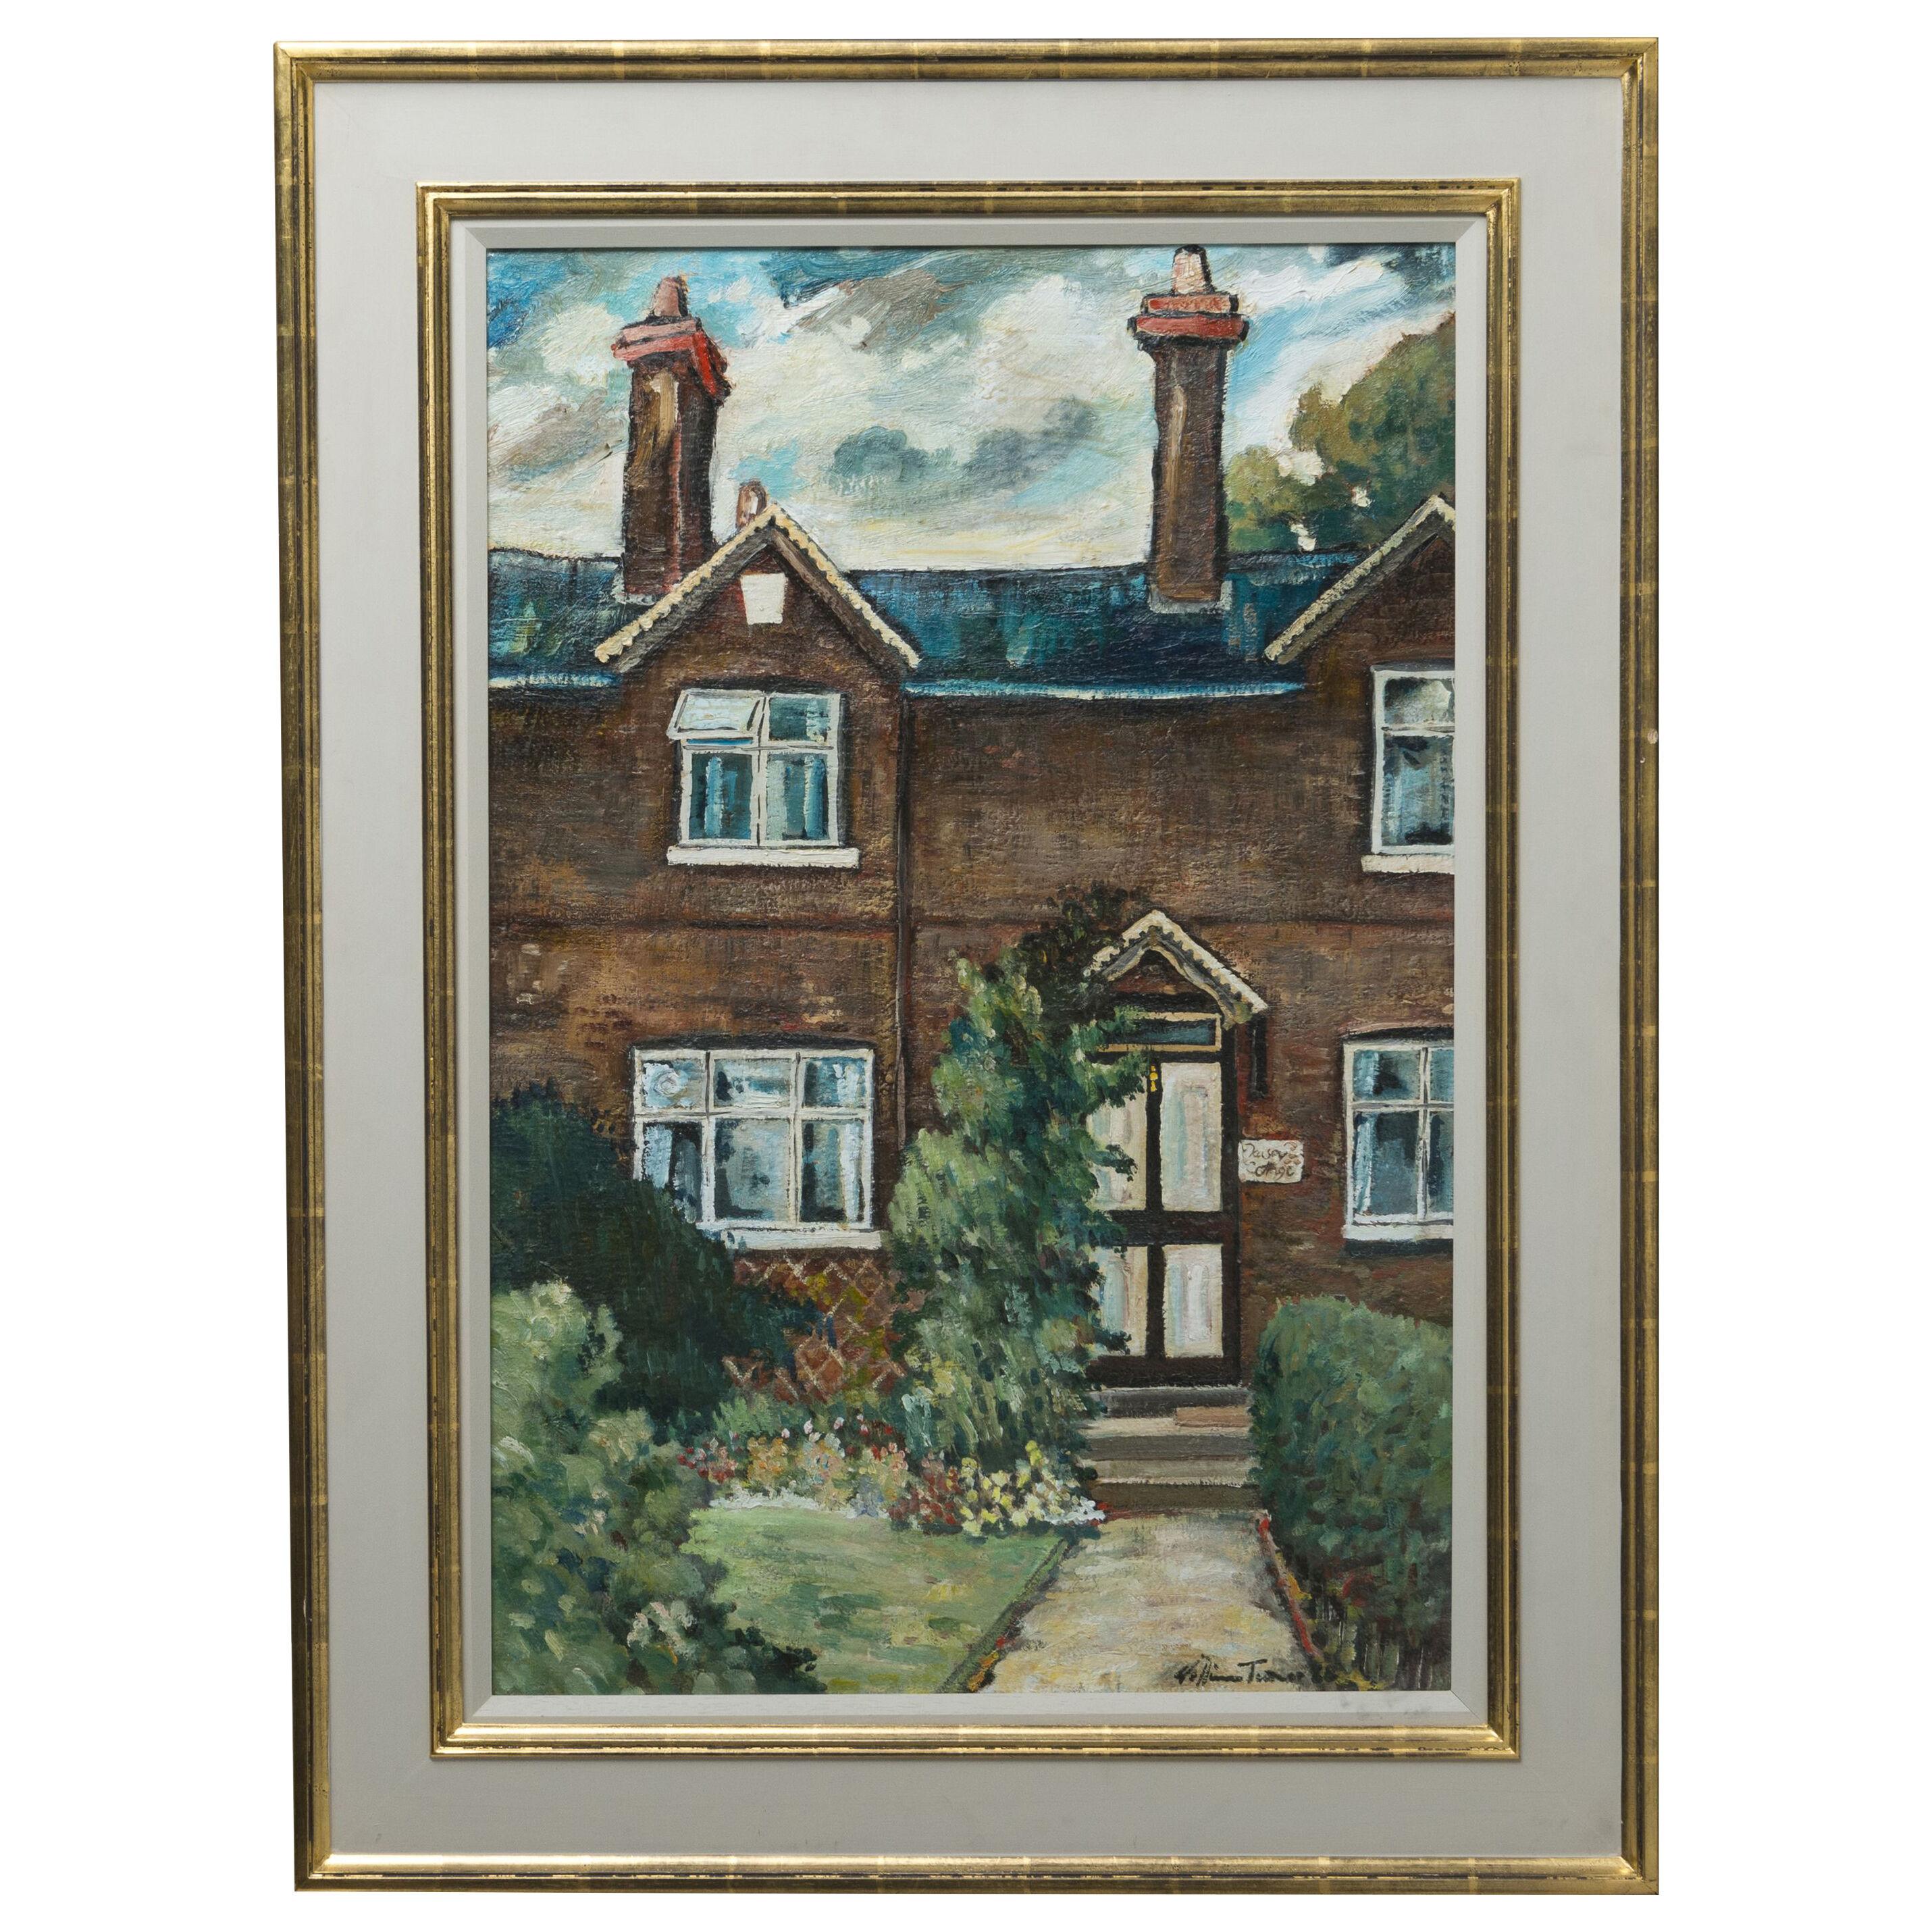 Oil painting of “Daisy Cottage, Knutsford” by William Turner, England 1988